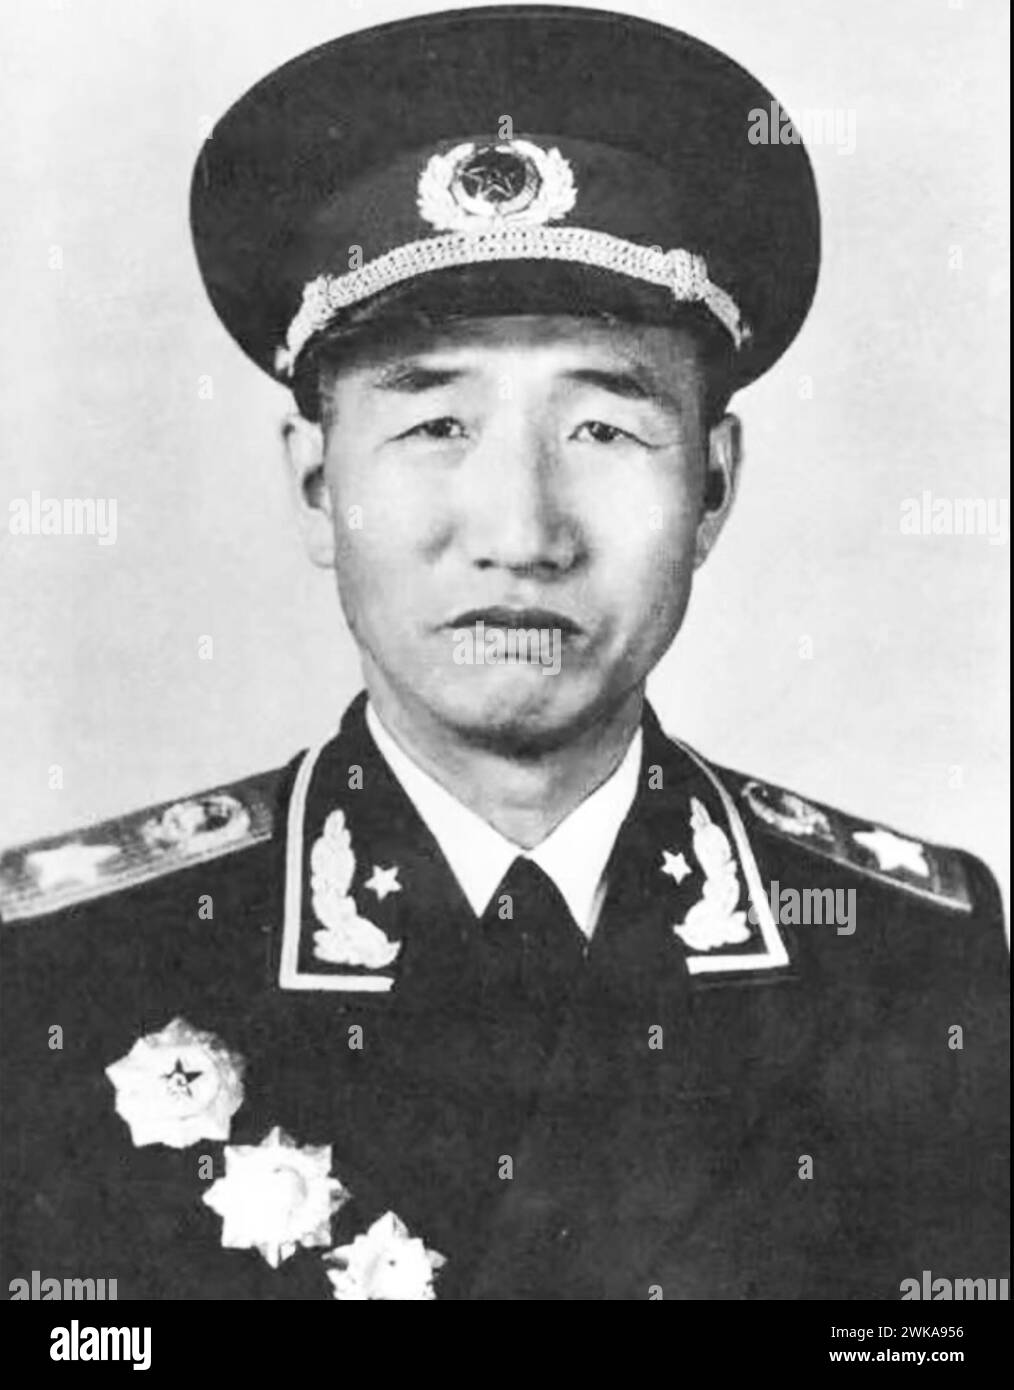 XU XIANGQIAN (1901-1990) Chinese Communist  officer in the Chinese People's Revolutionary Army - photo from 1955 Stock Photo